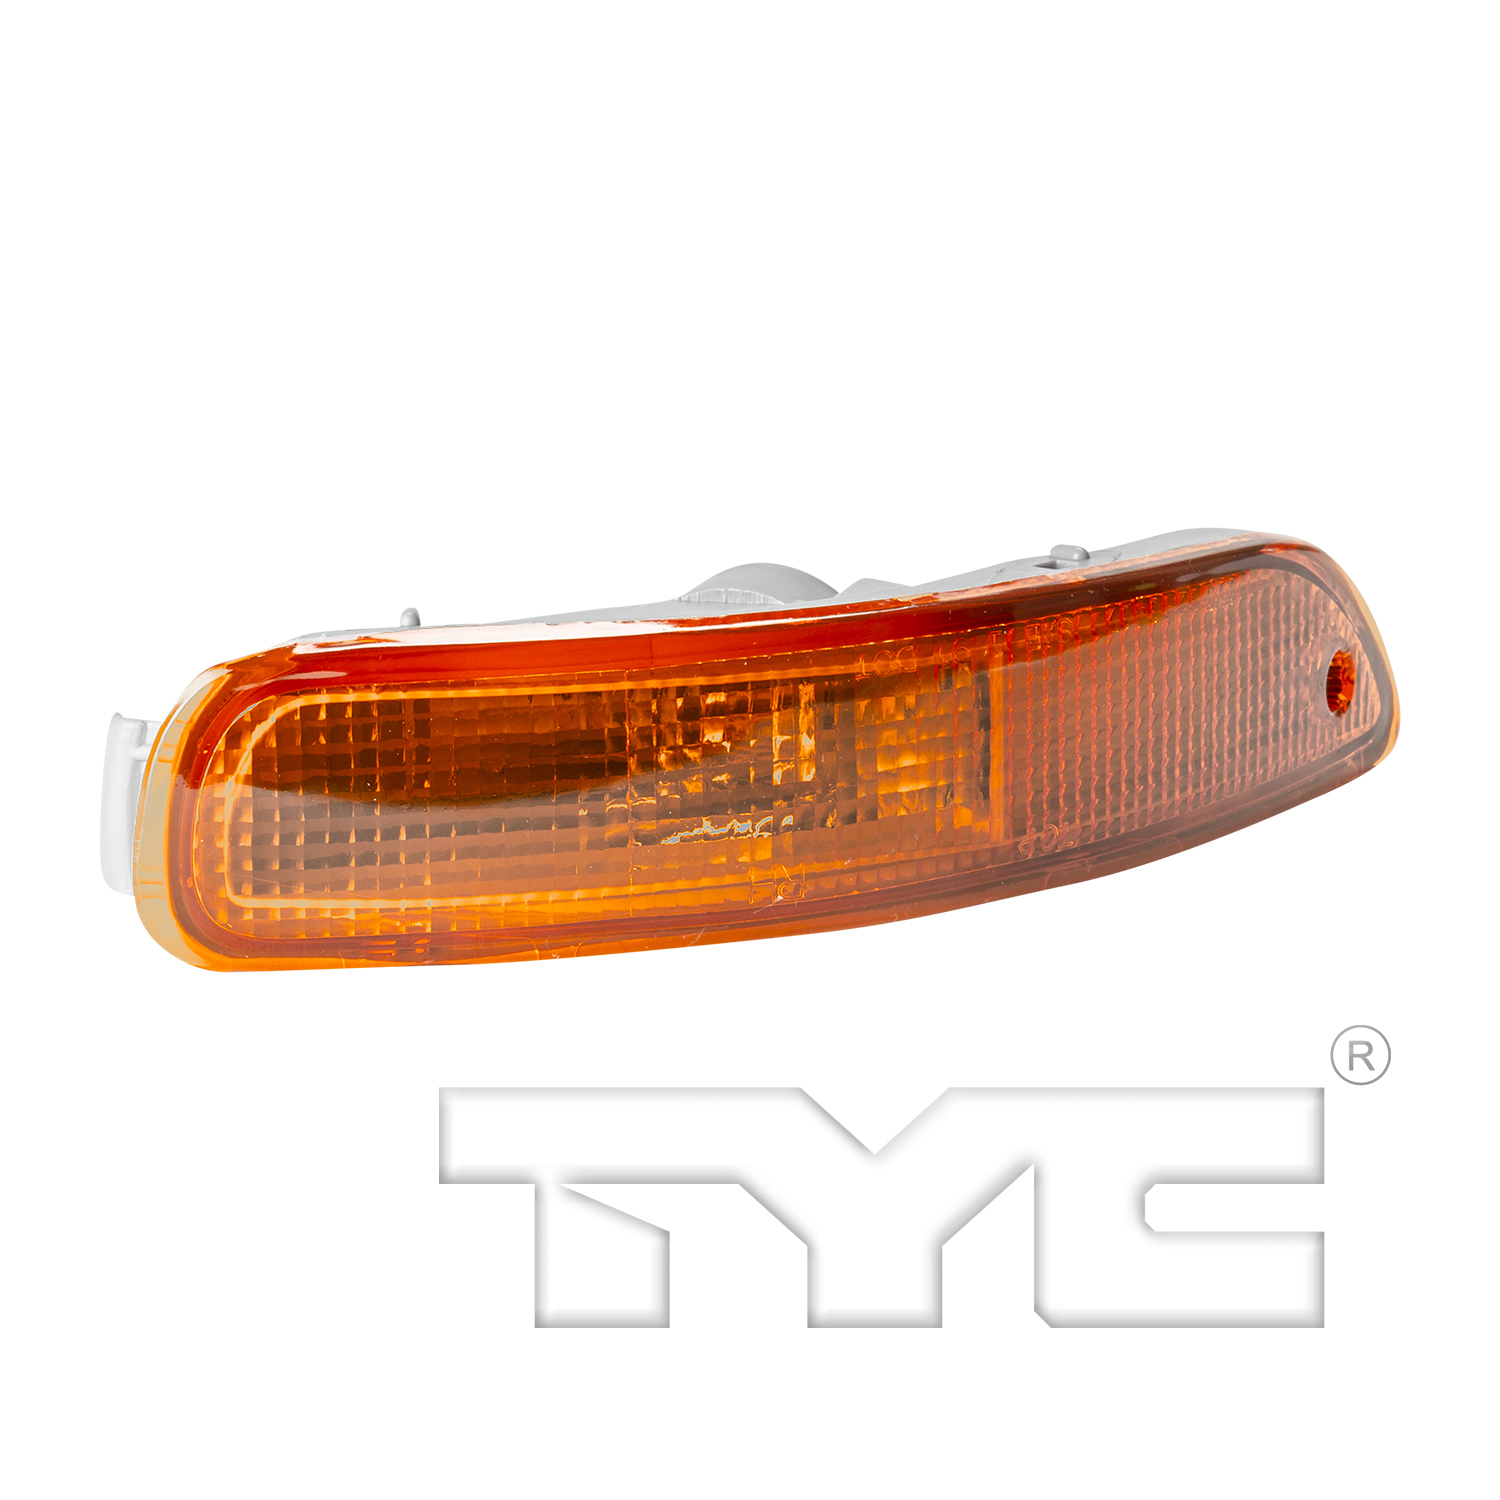 Aftermarket LAMPS for TOYOTA - COROLLA, COROLLA,93-97,RT Front signal lamp